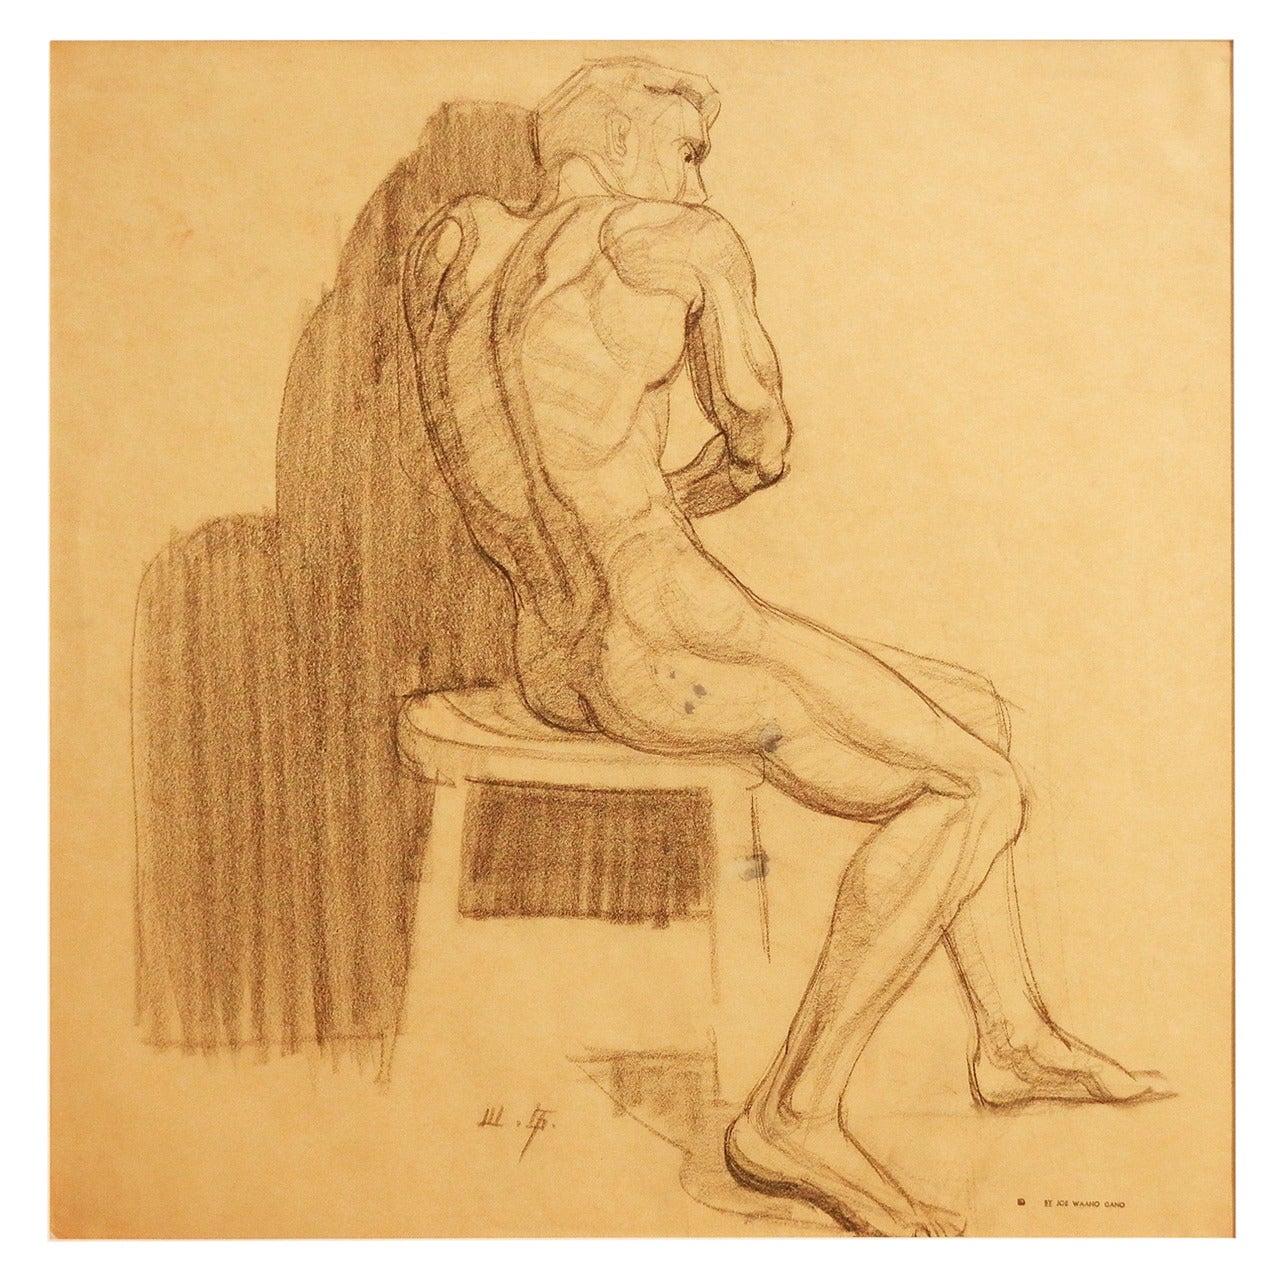 "Seated Male Nude, " Superb Art Deco Drawing by Waano Gano